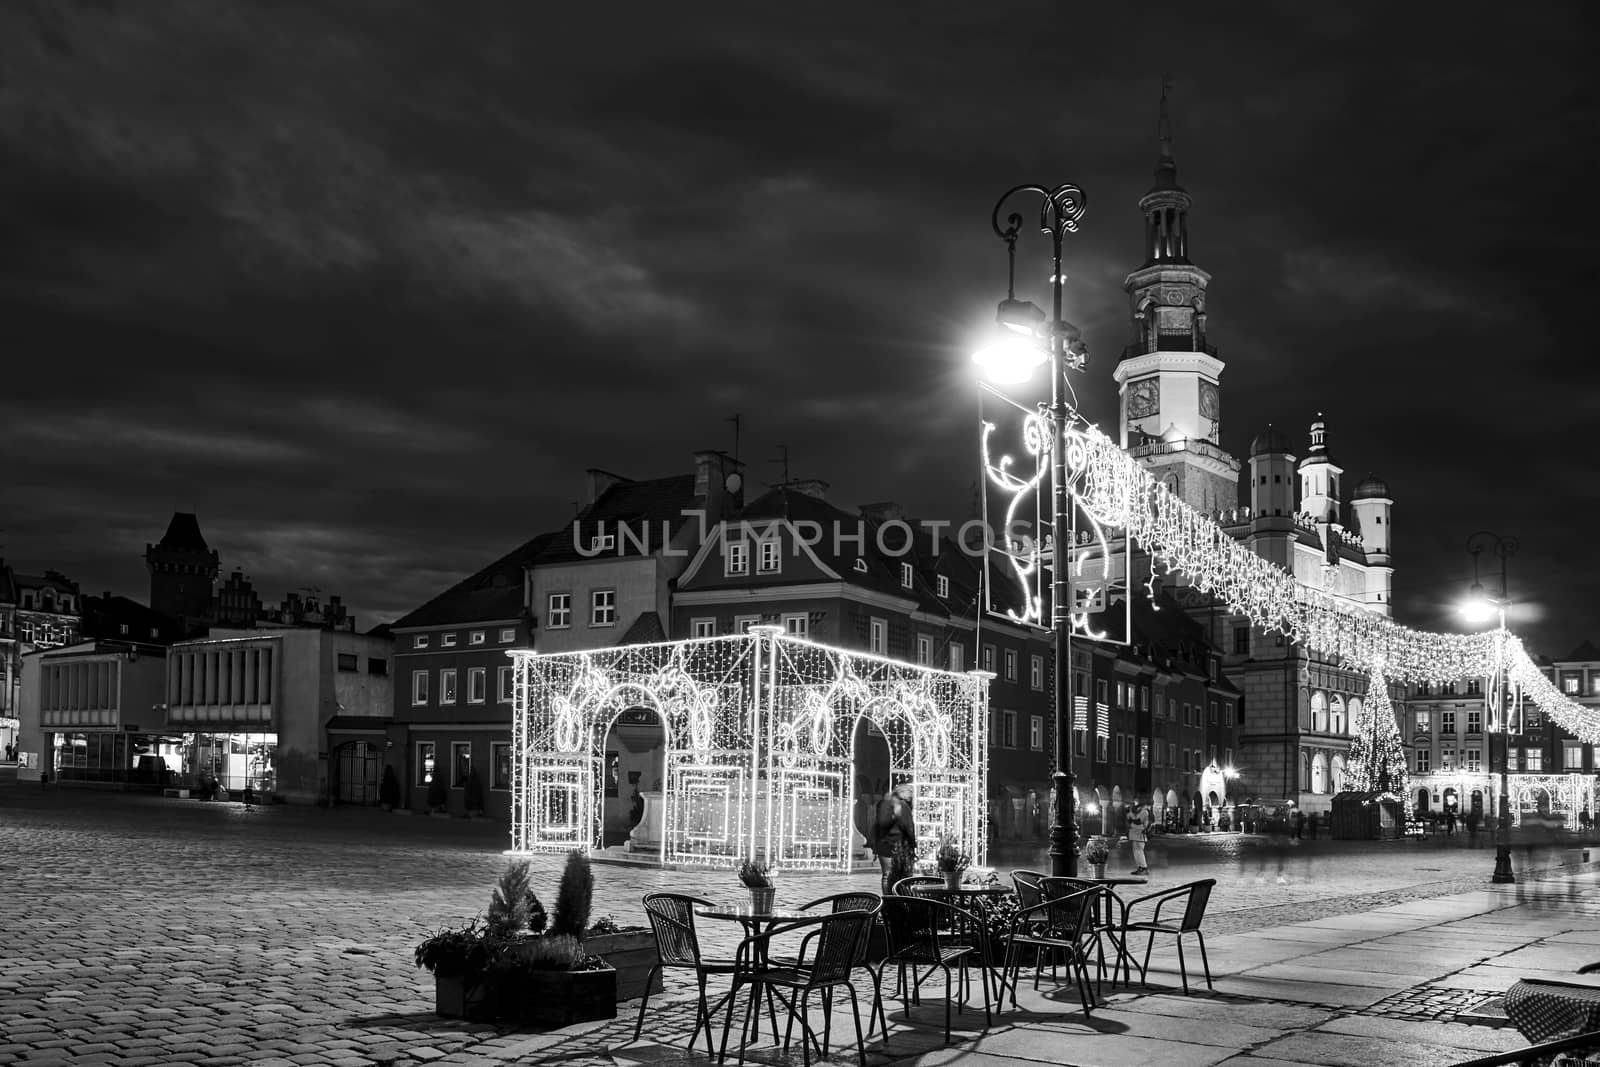 historic tenement houses and the renaissance town hall with Christmas decorations on the market square at night by gkordus